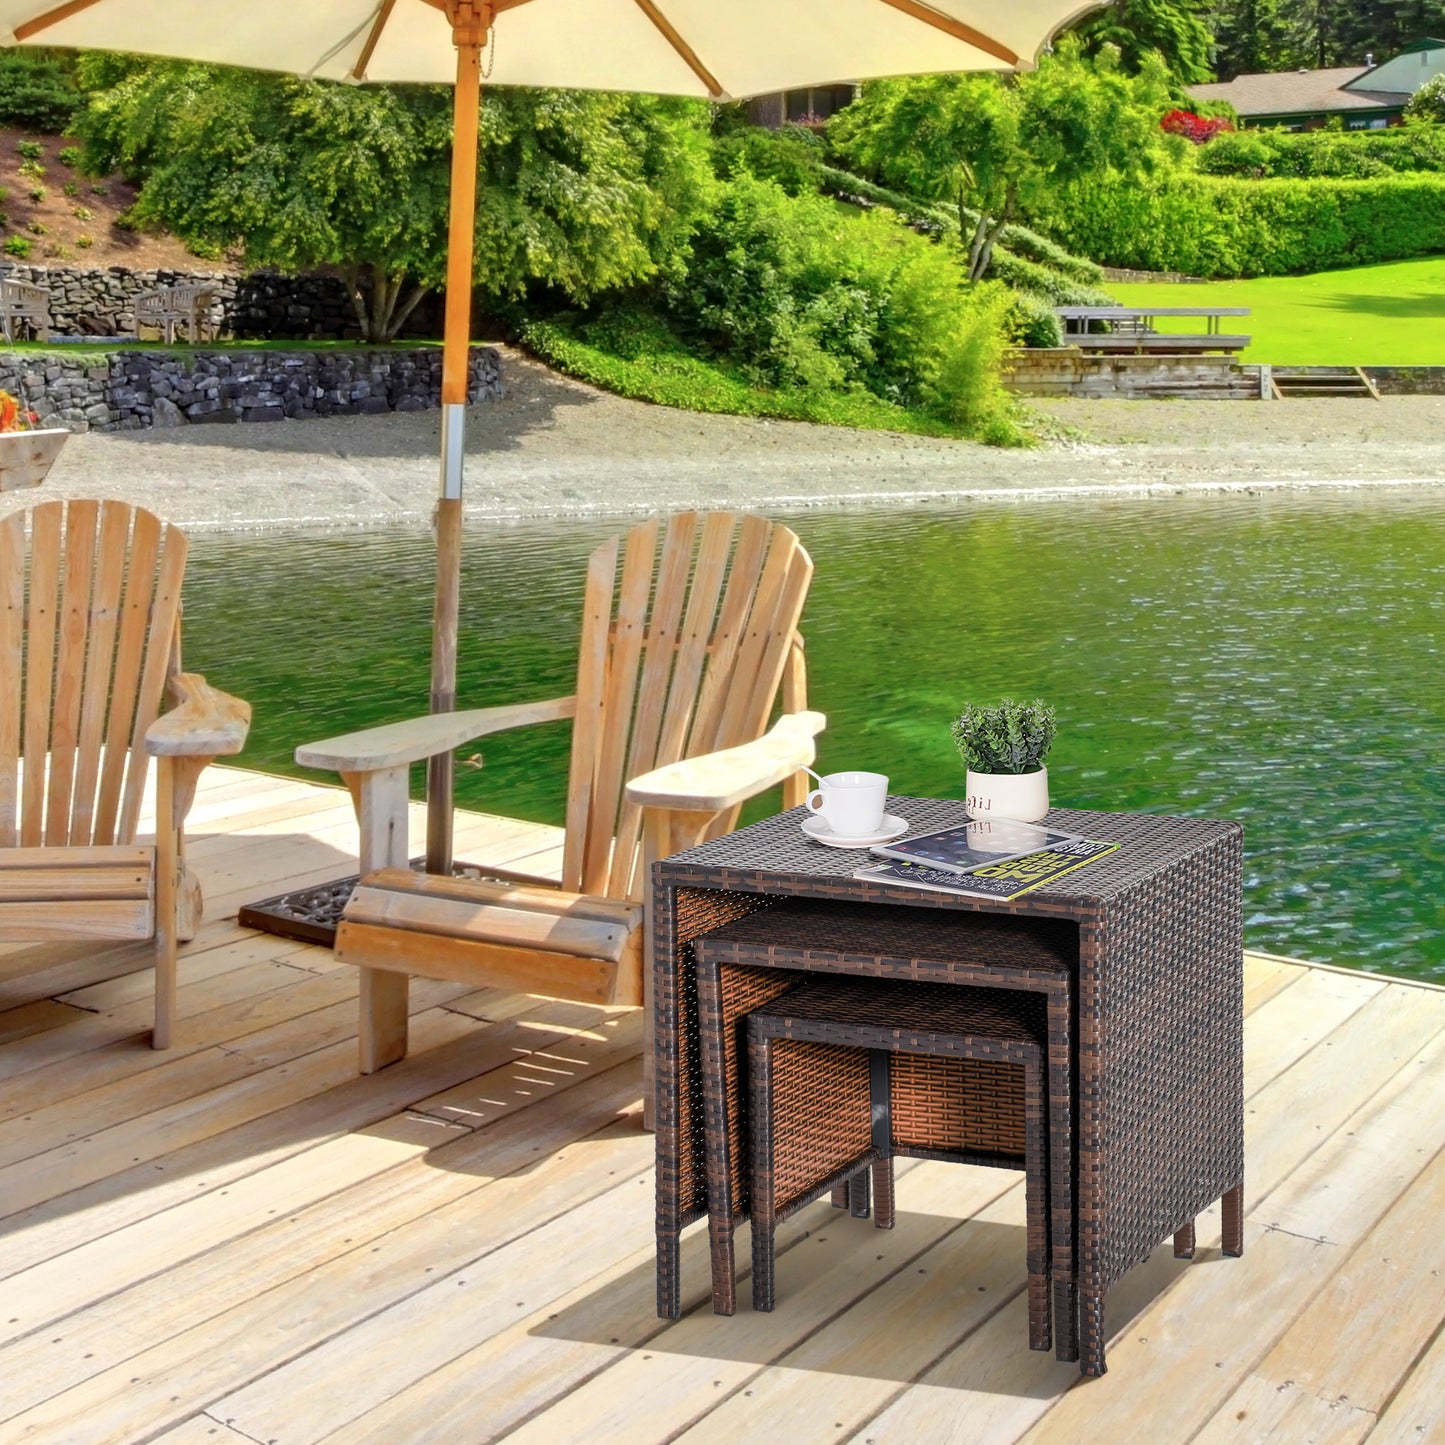 Outsunny Rattan Tea Table Set Garden Furniture 3 PCs Nest of Tables Patio Outdoor End Side Table Wicker Conservatory